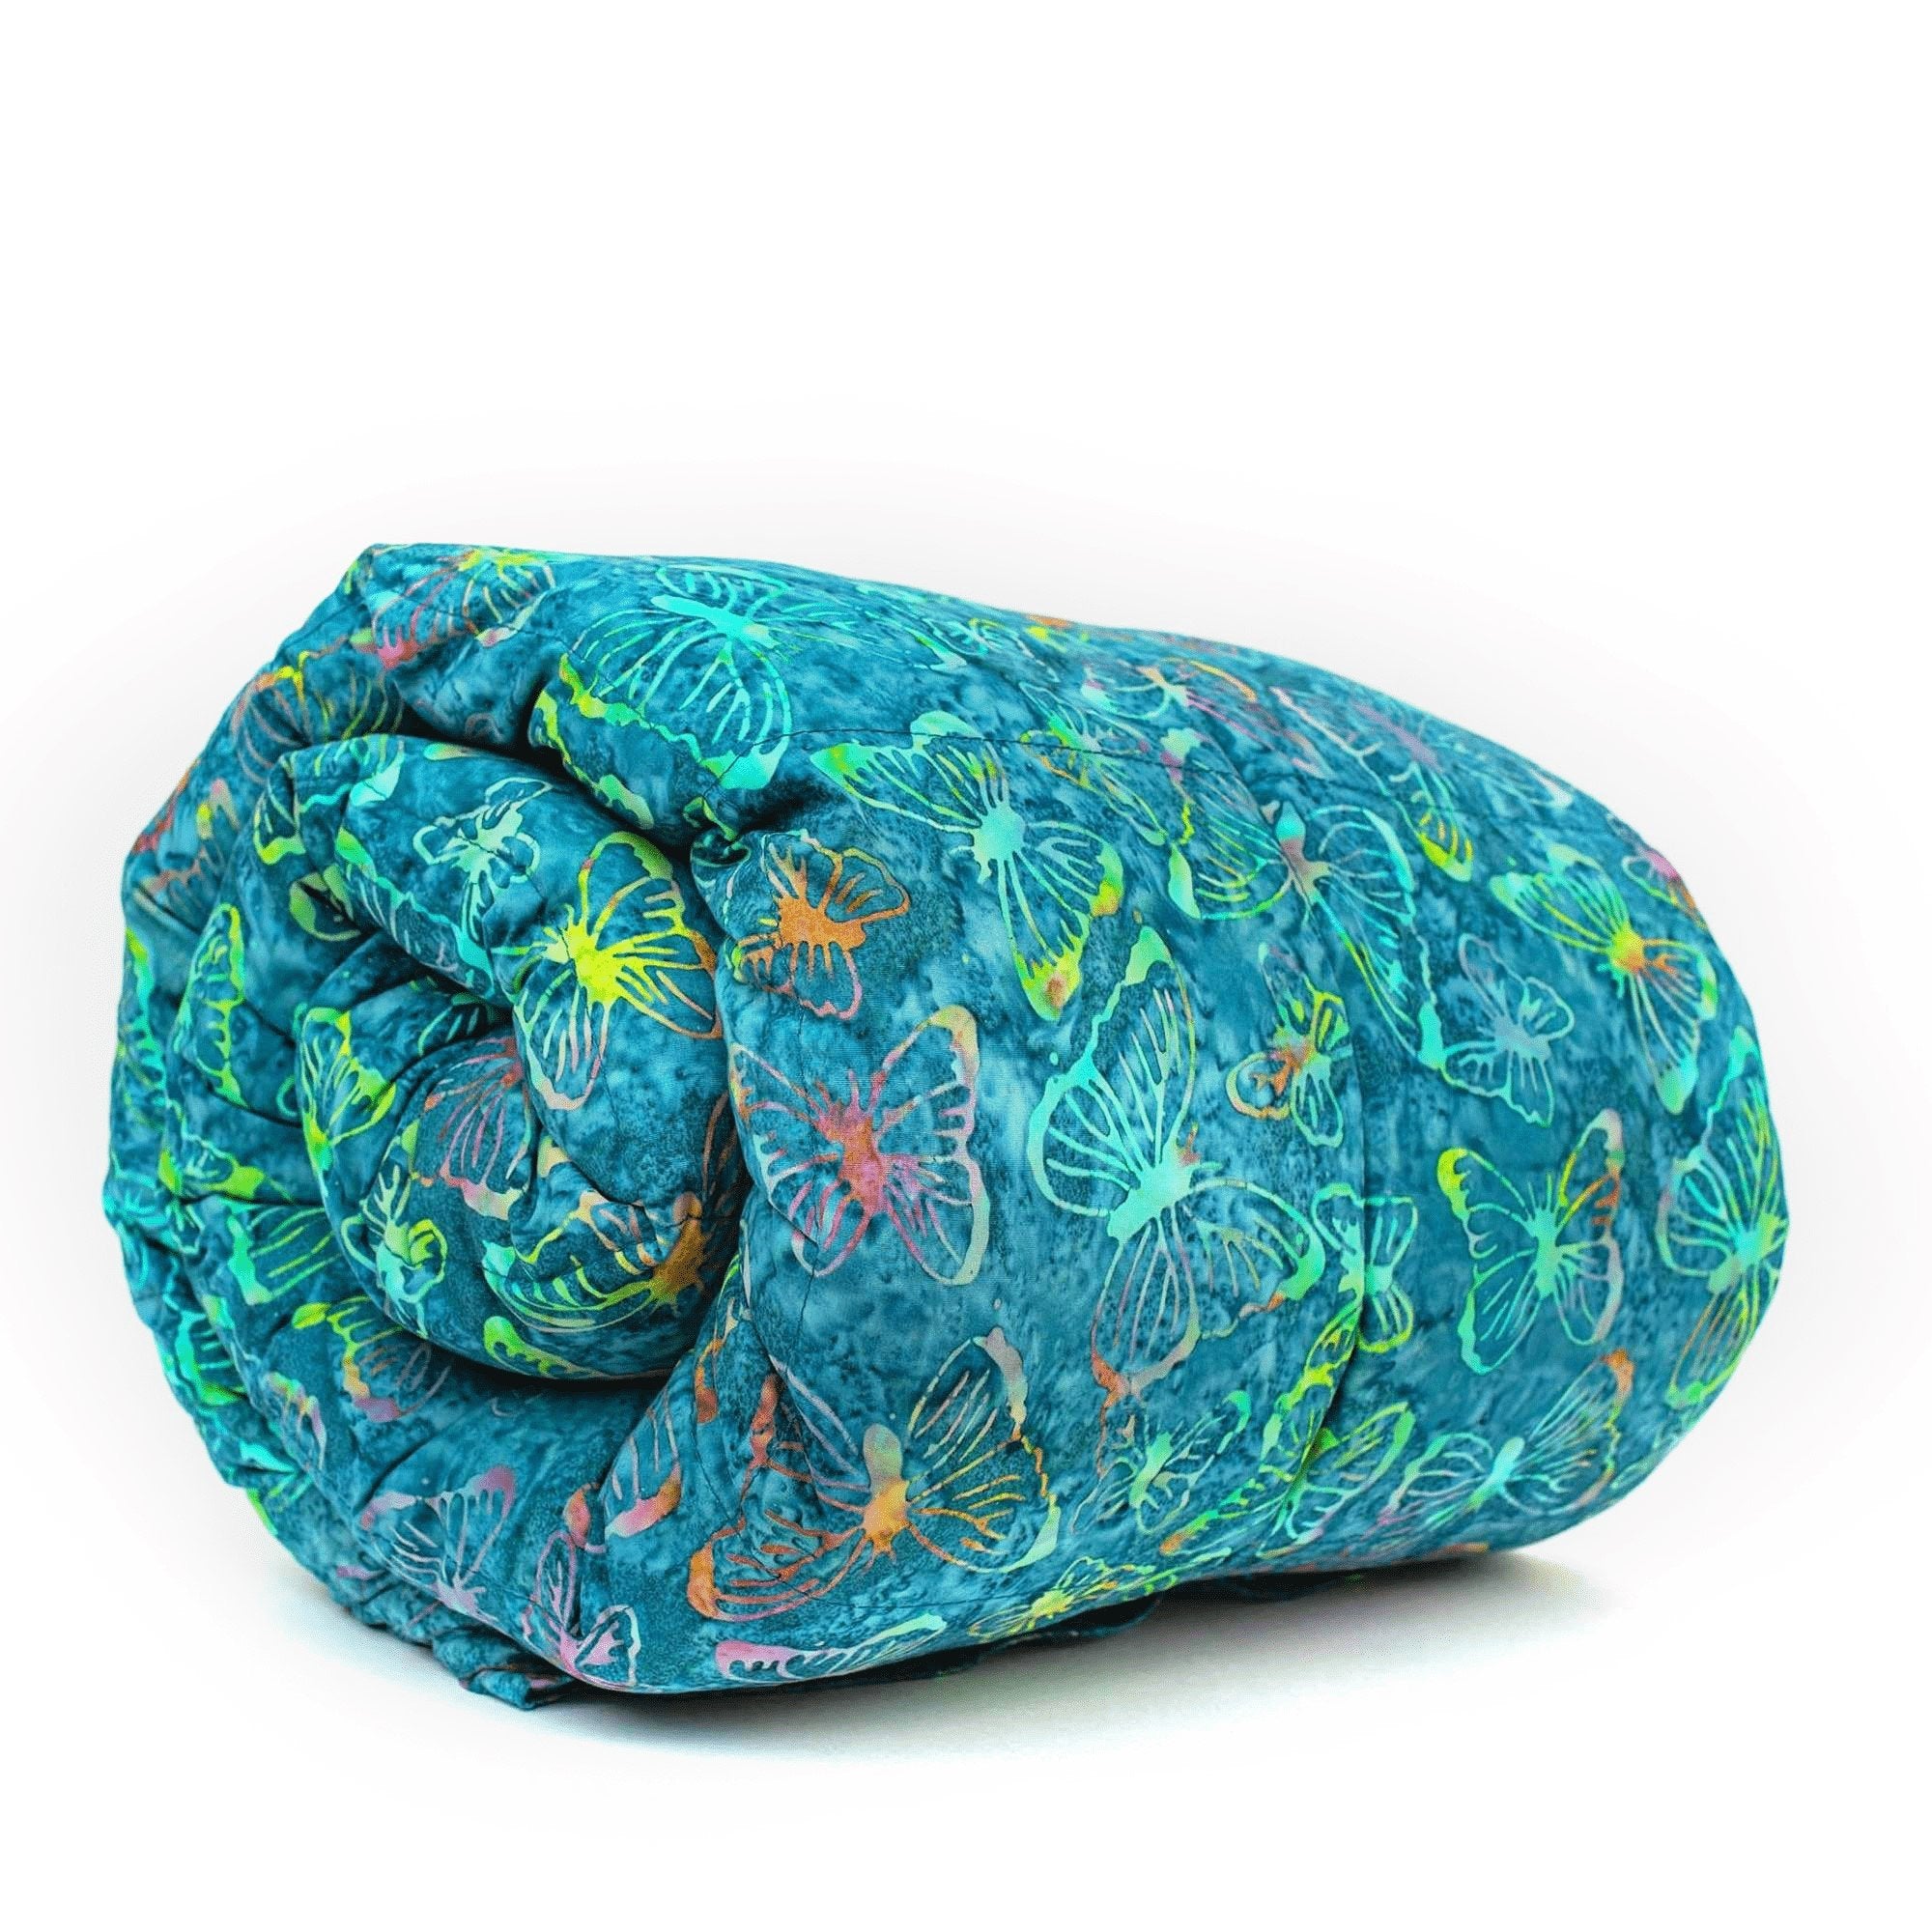 Mosaic Weighted Blankets Butterflies on Teal Weighted Blanket